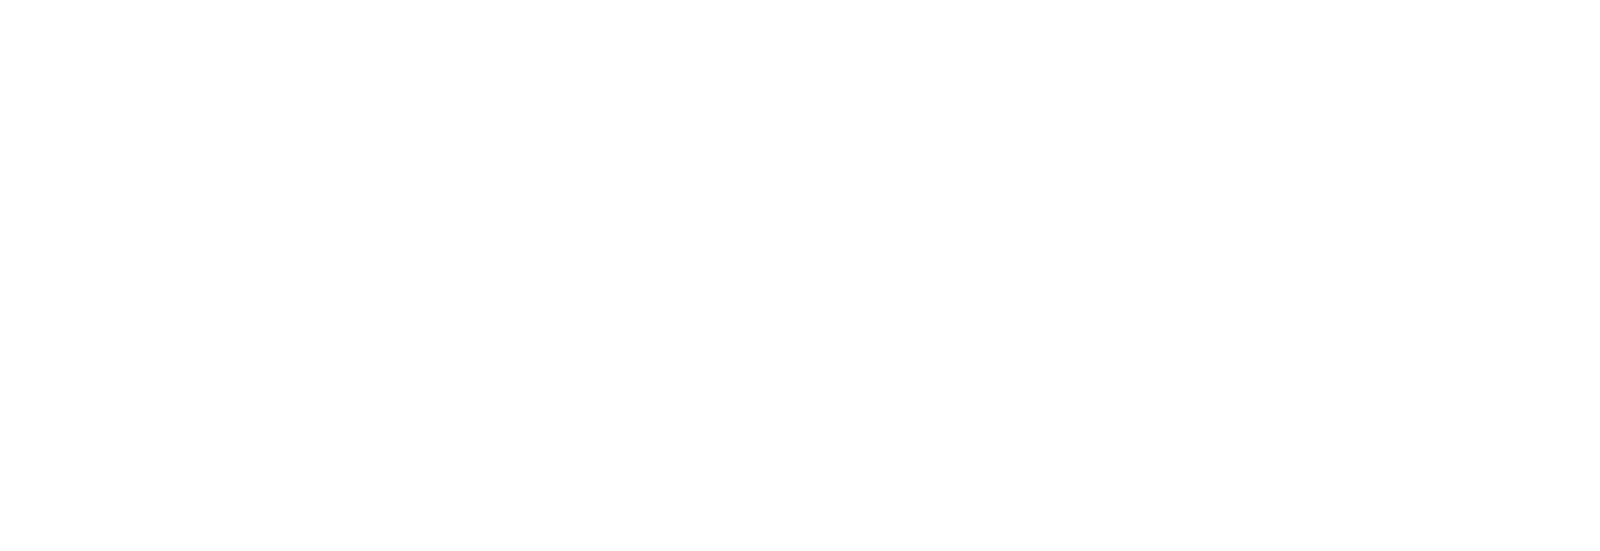 Lost Scepter - Echoes of the Deep